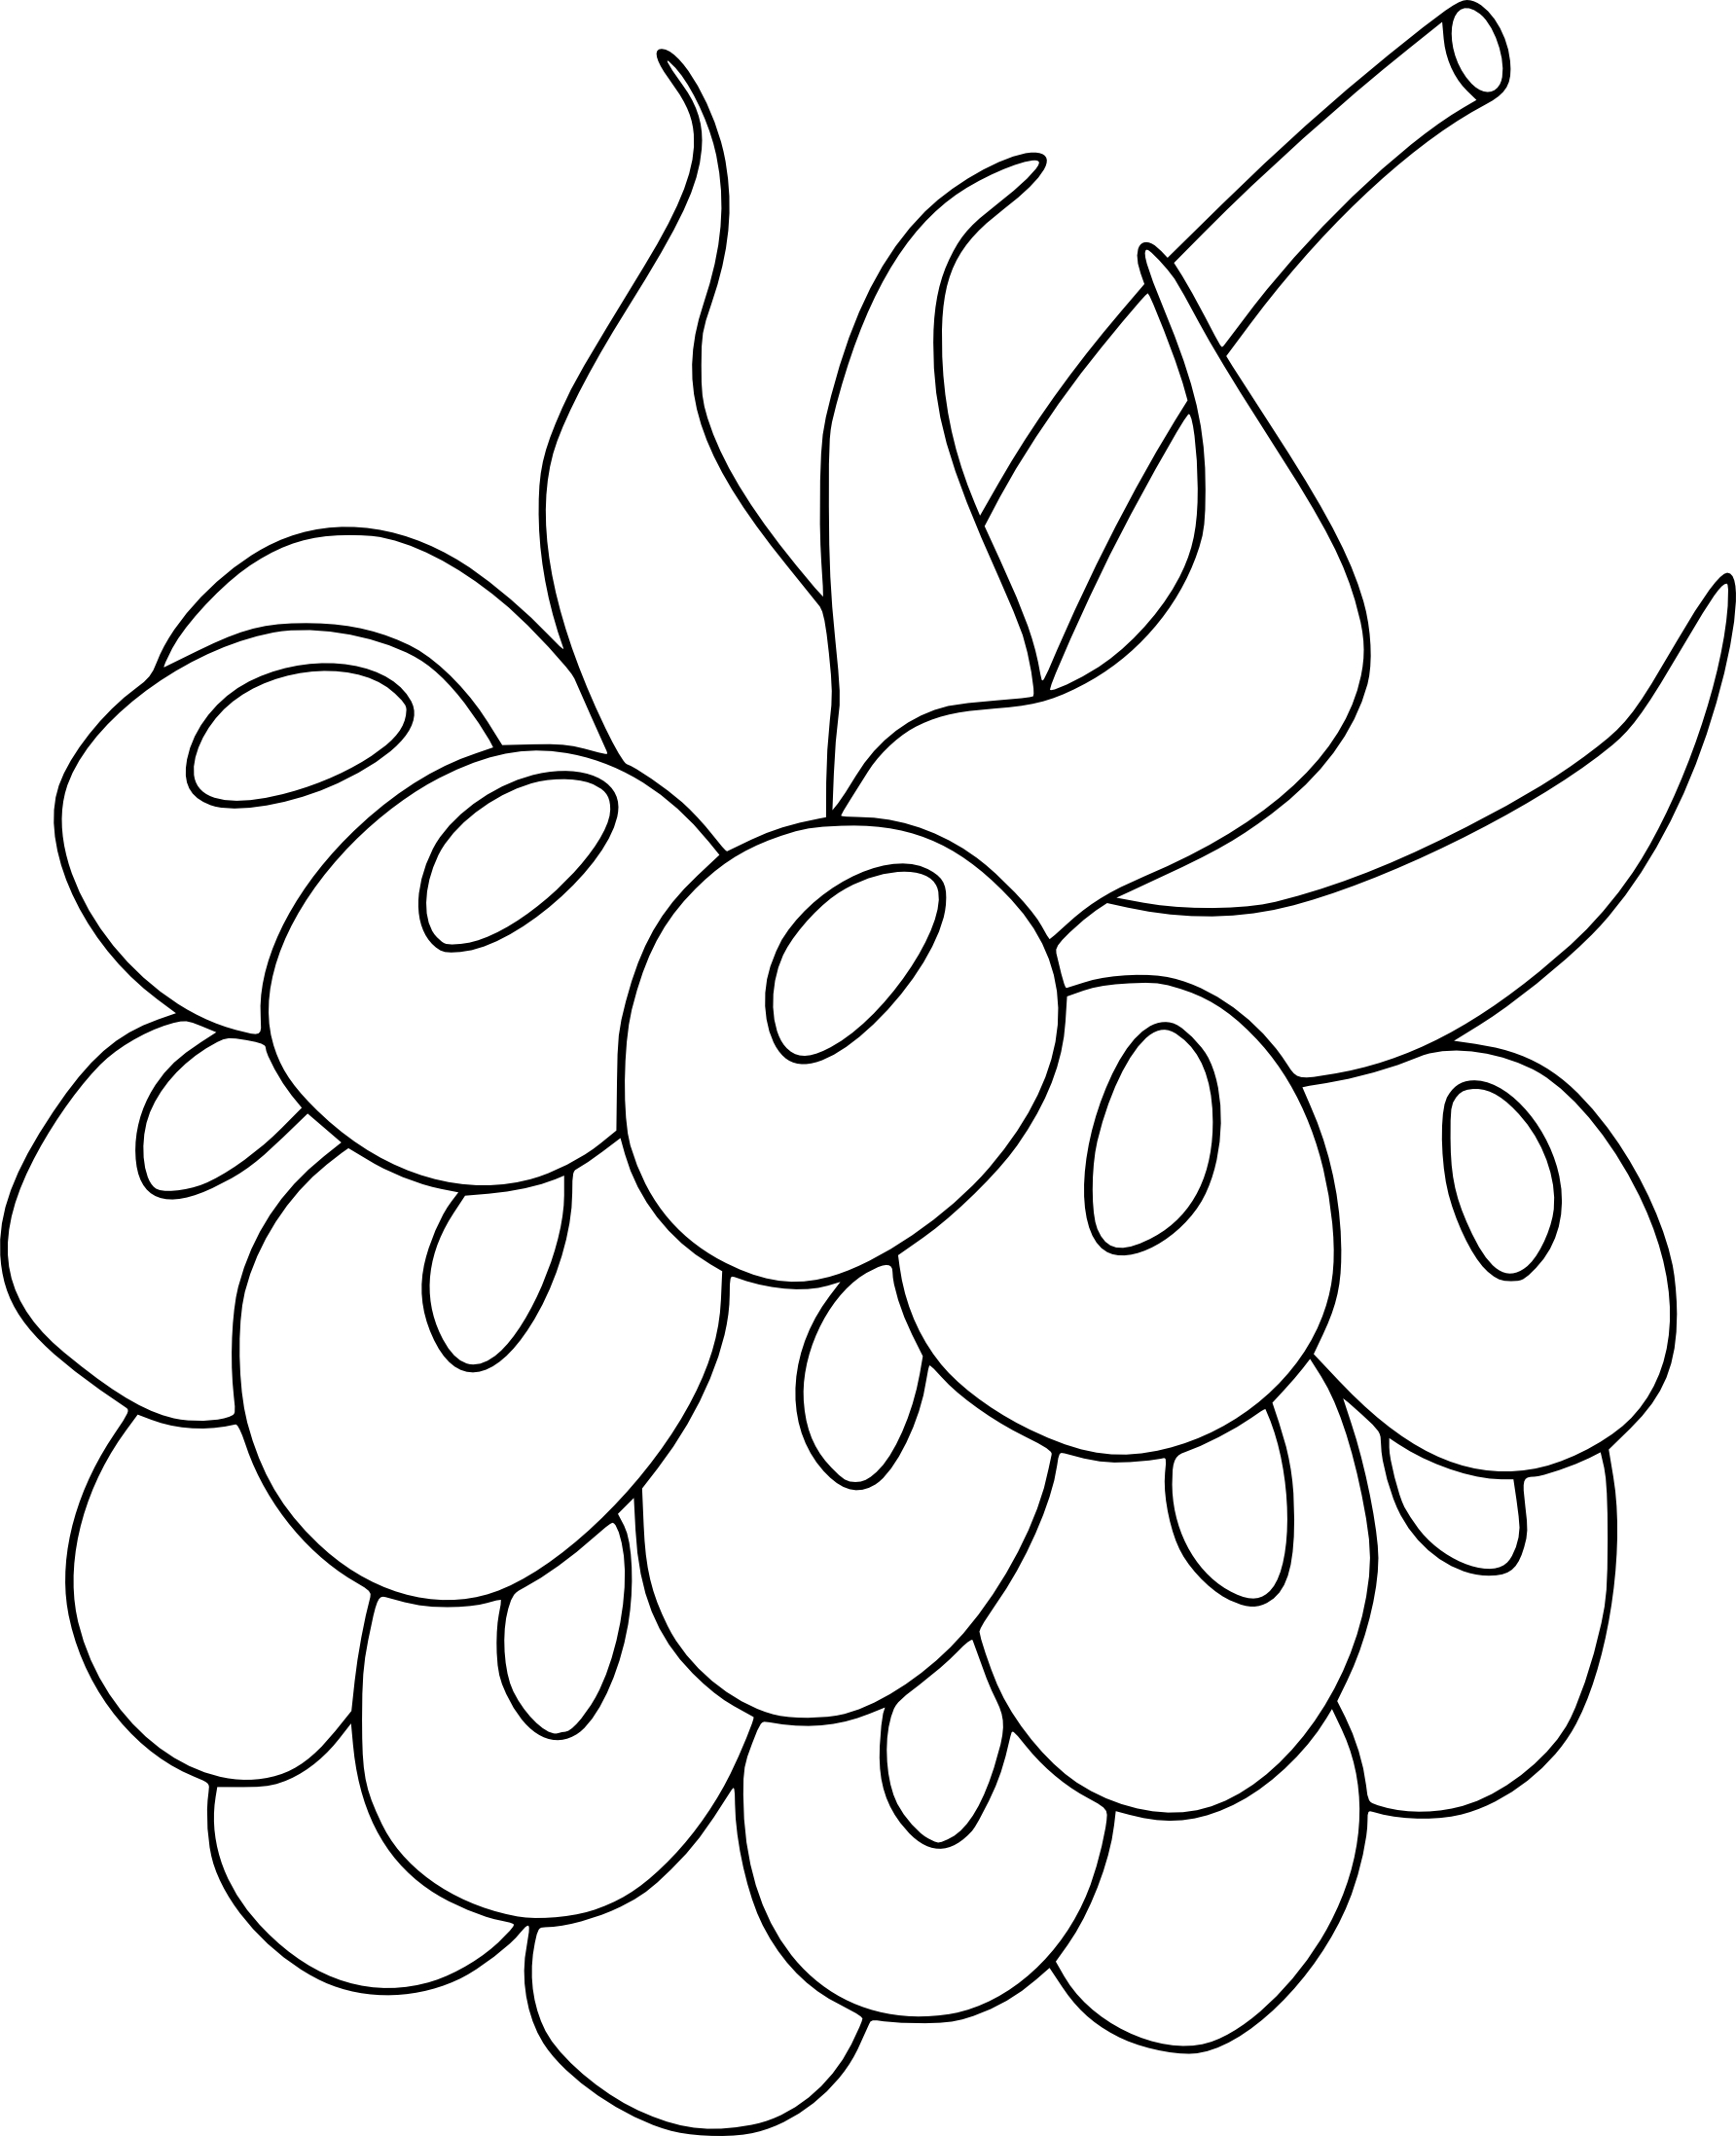 Raspberry drawing and coloring page